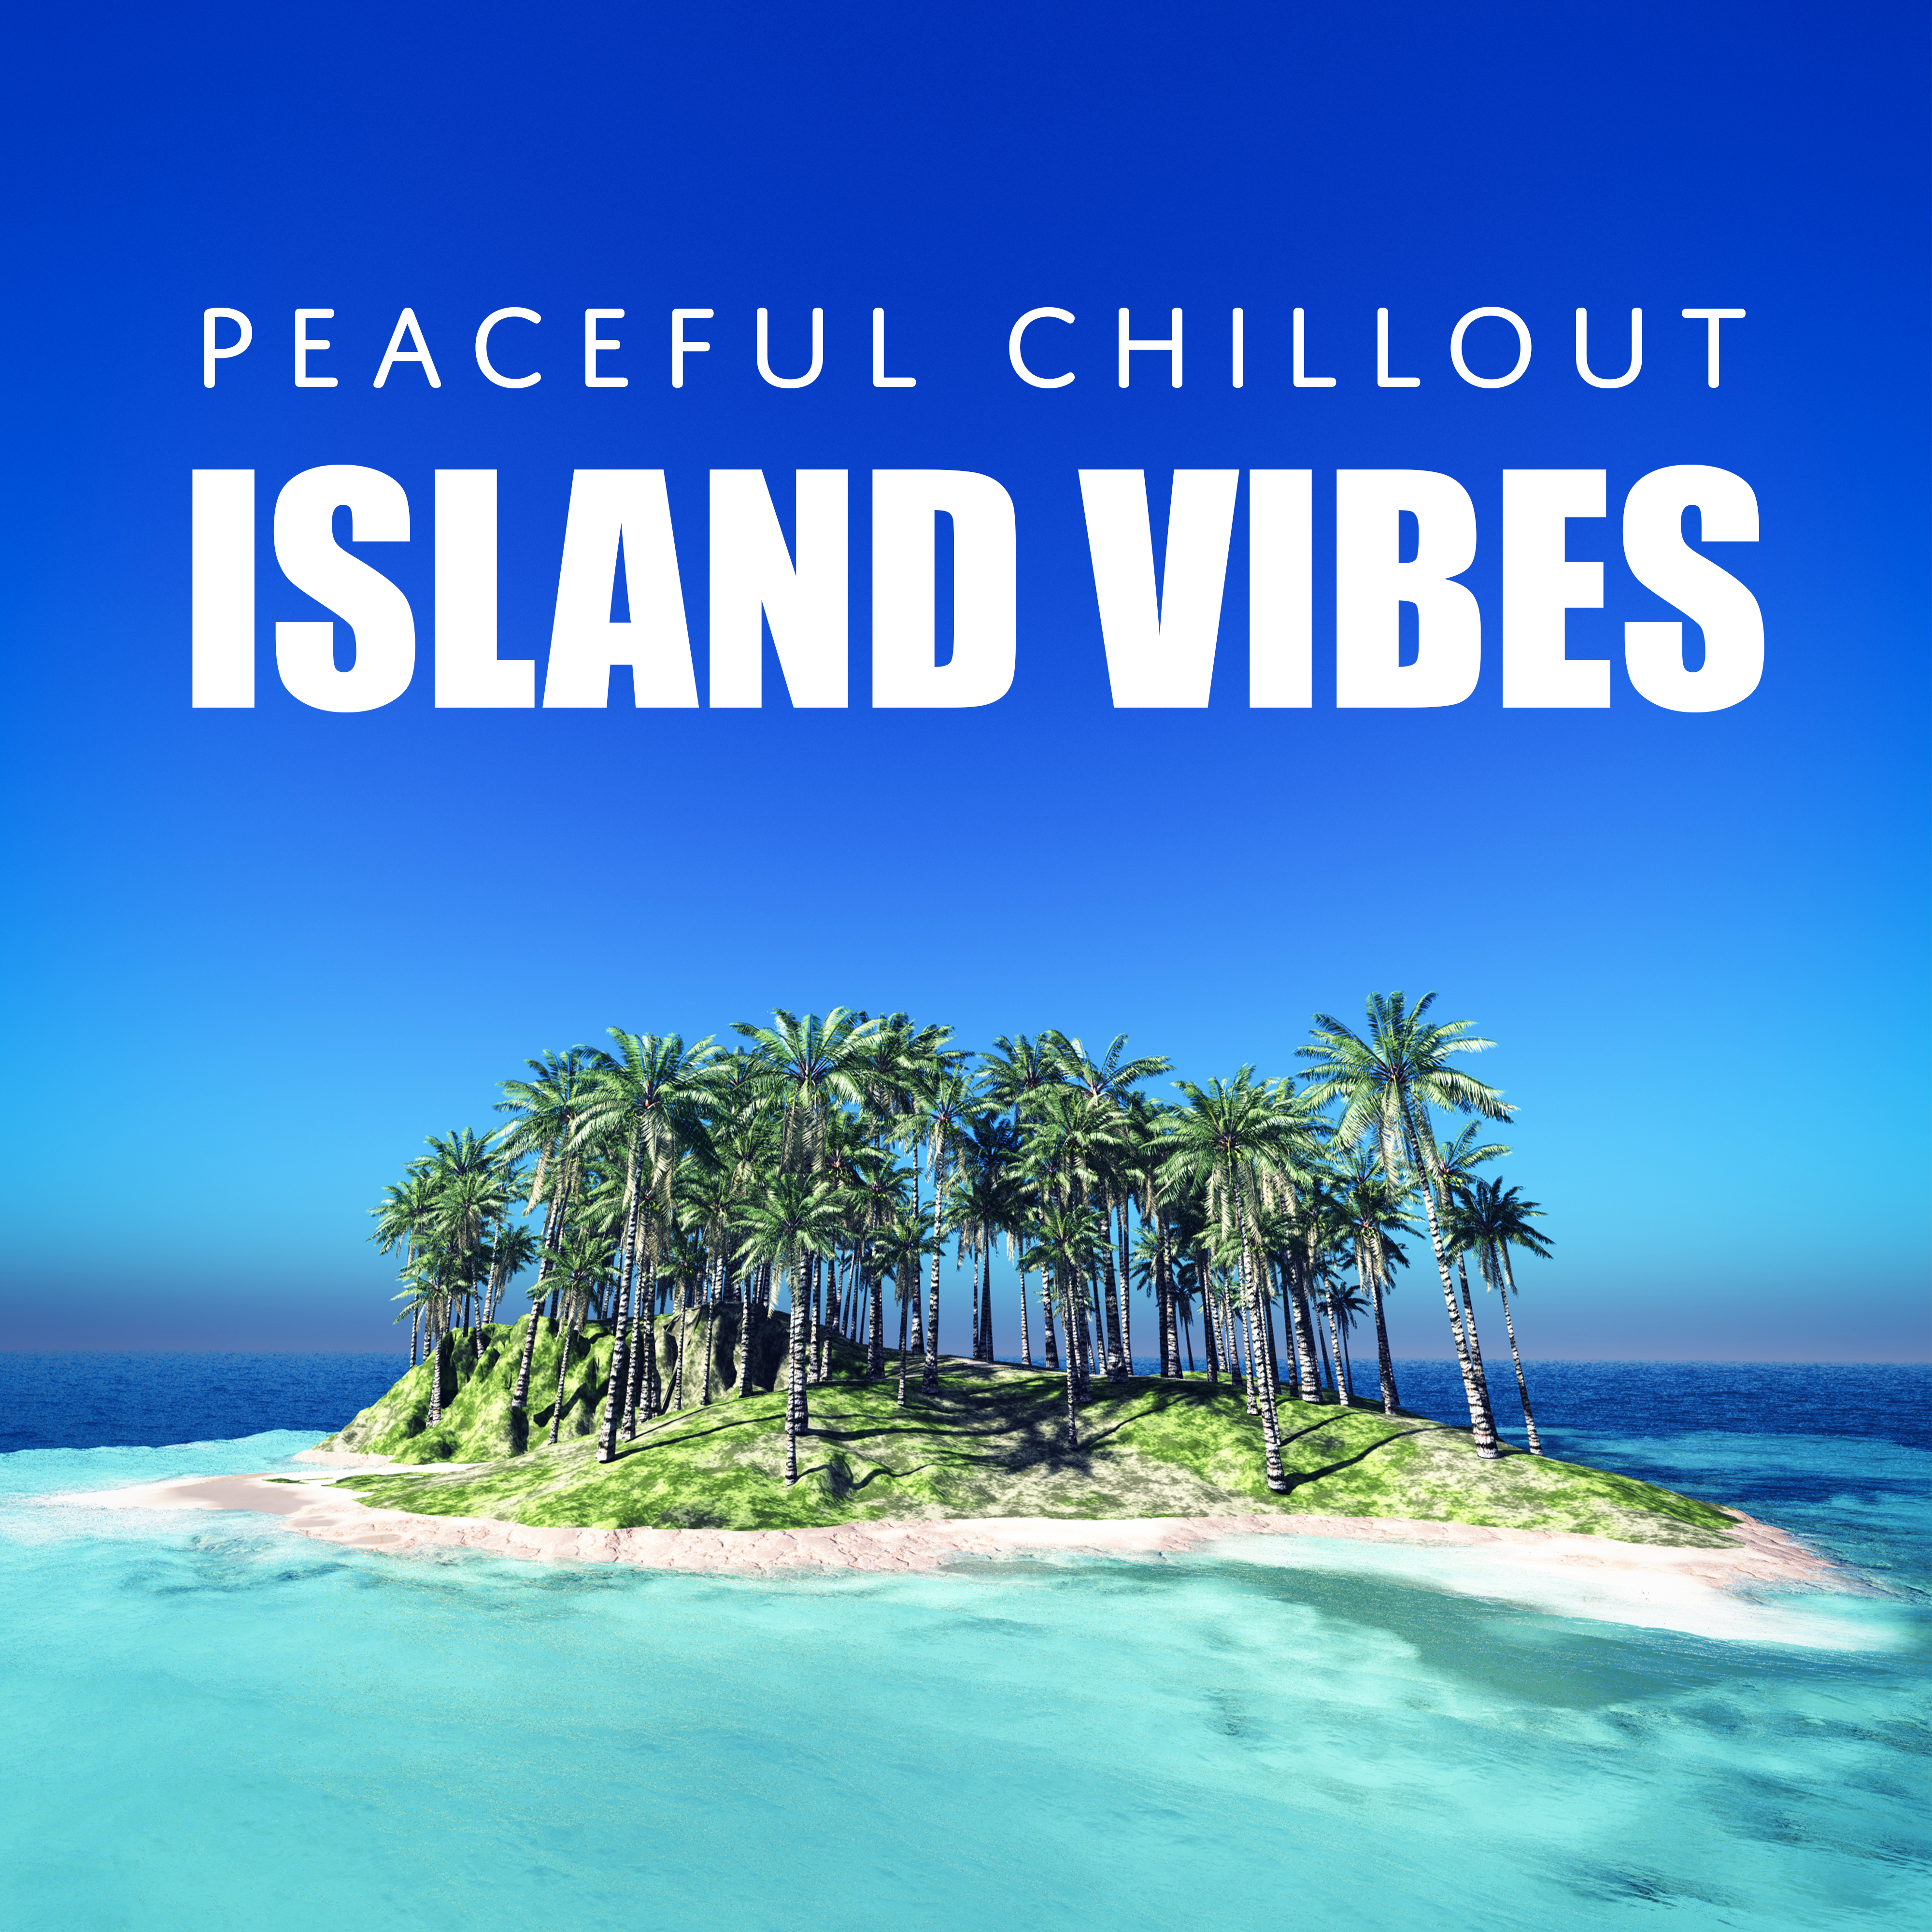 Peaceful Chillout Island Vibes